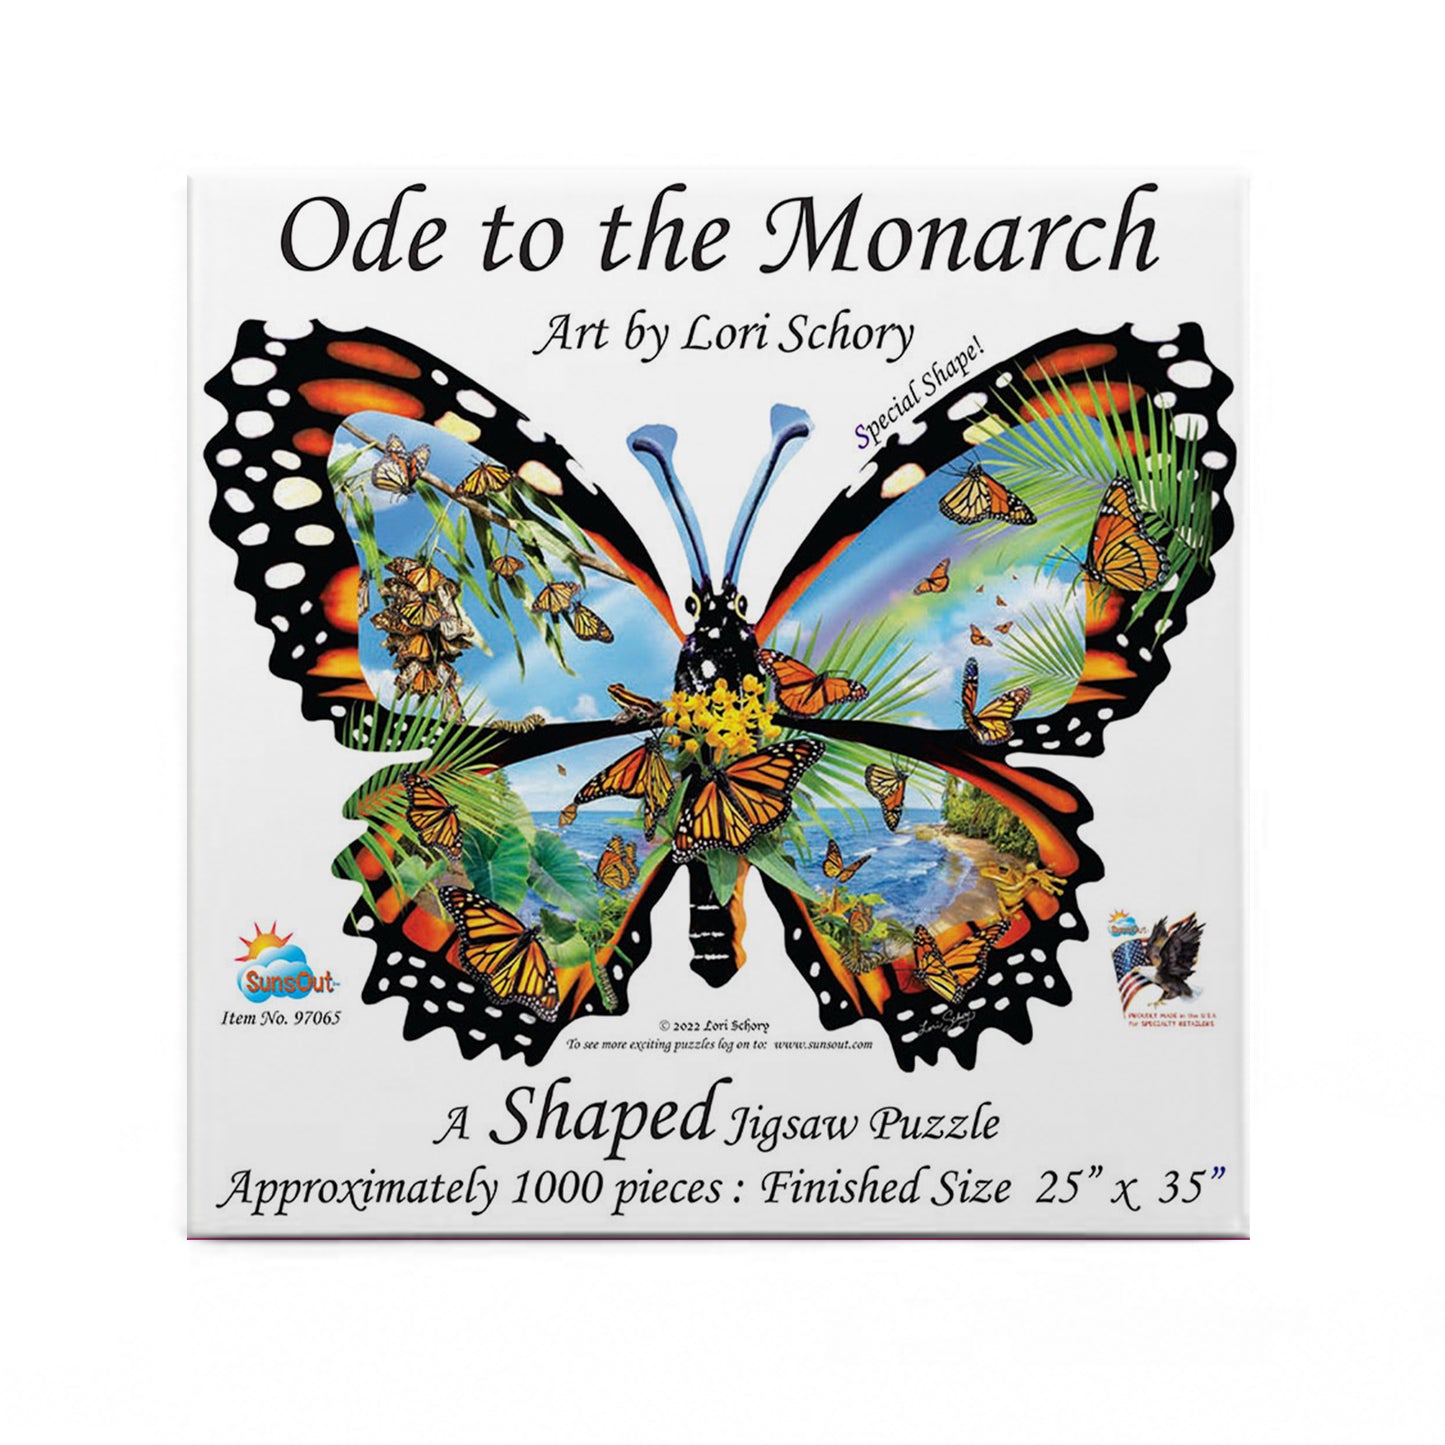 Ode to the Monarch - Shaped 1000 Piece Jigsaw Puzzle